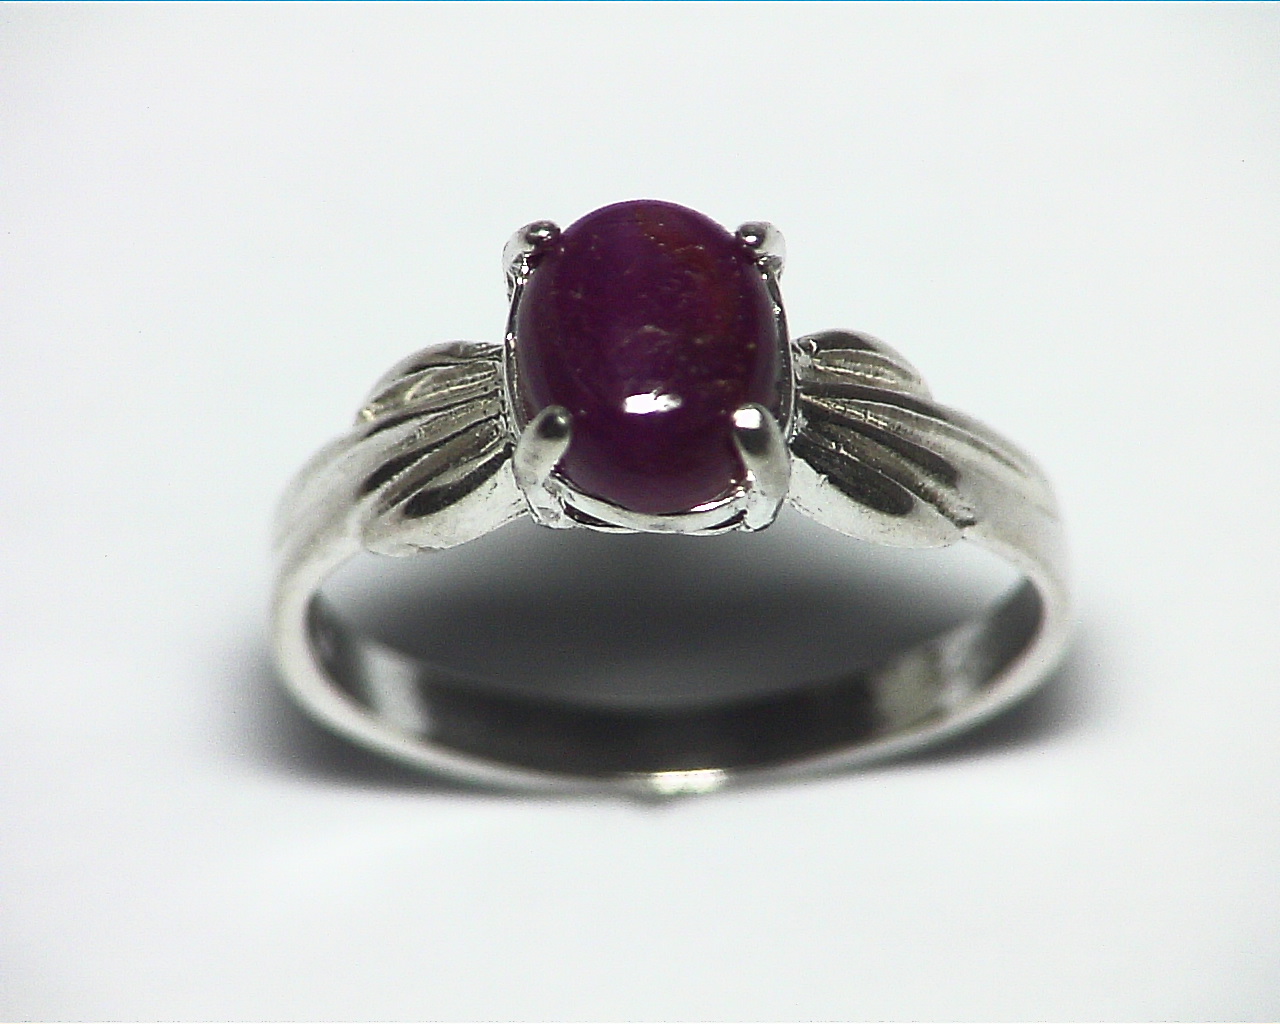 Star Ruby Cabochon Natural Genuine Gemstone Sterling Silver Ring RSS,488